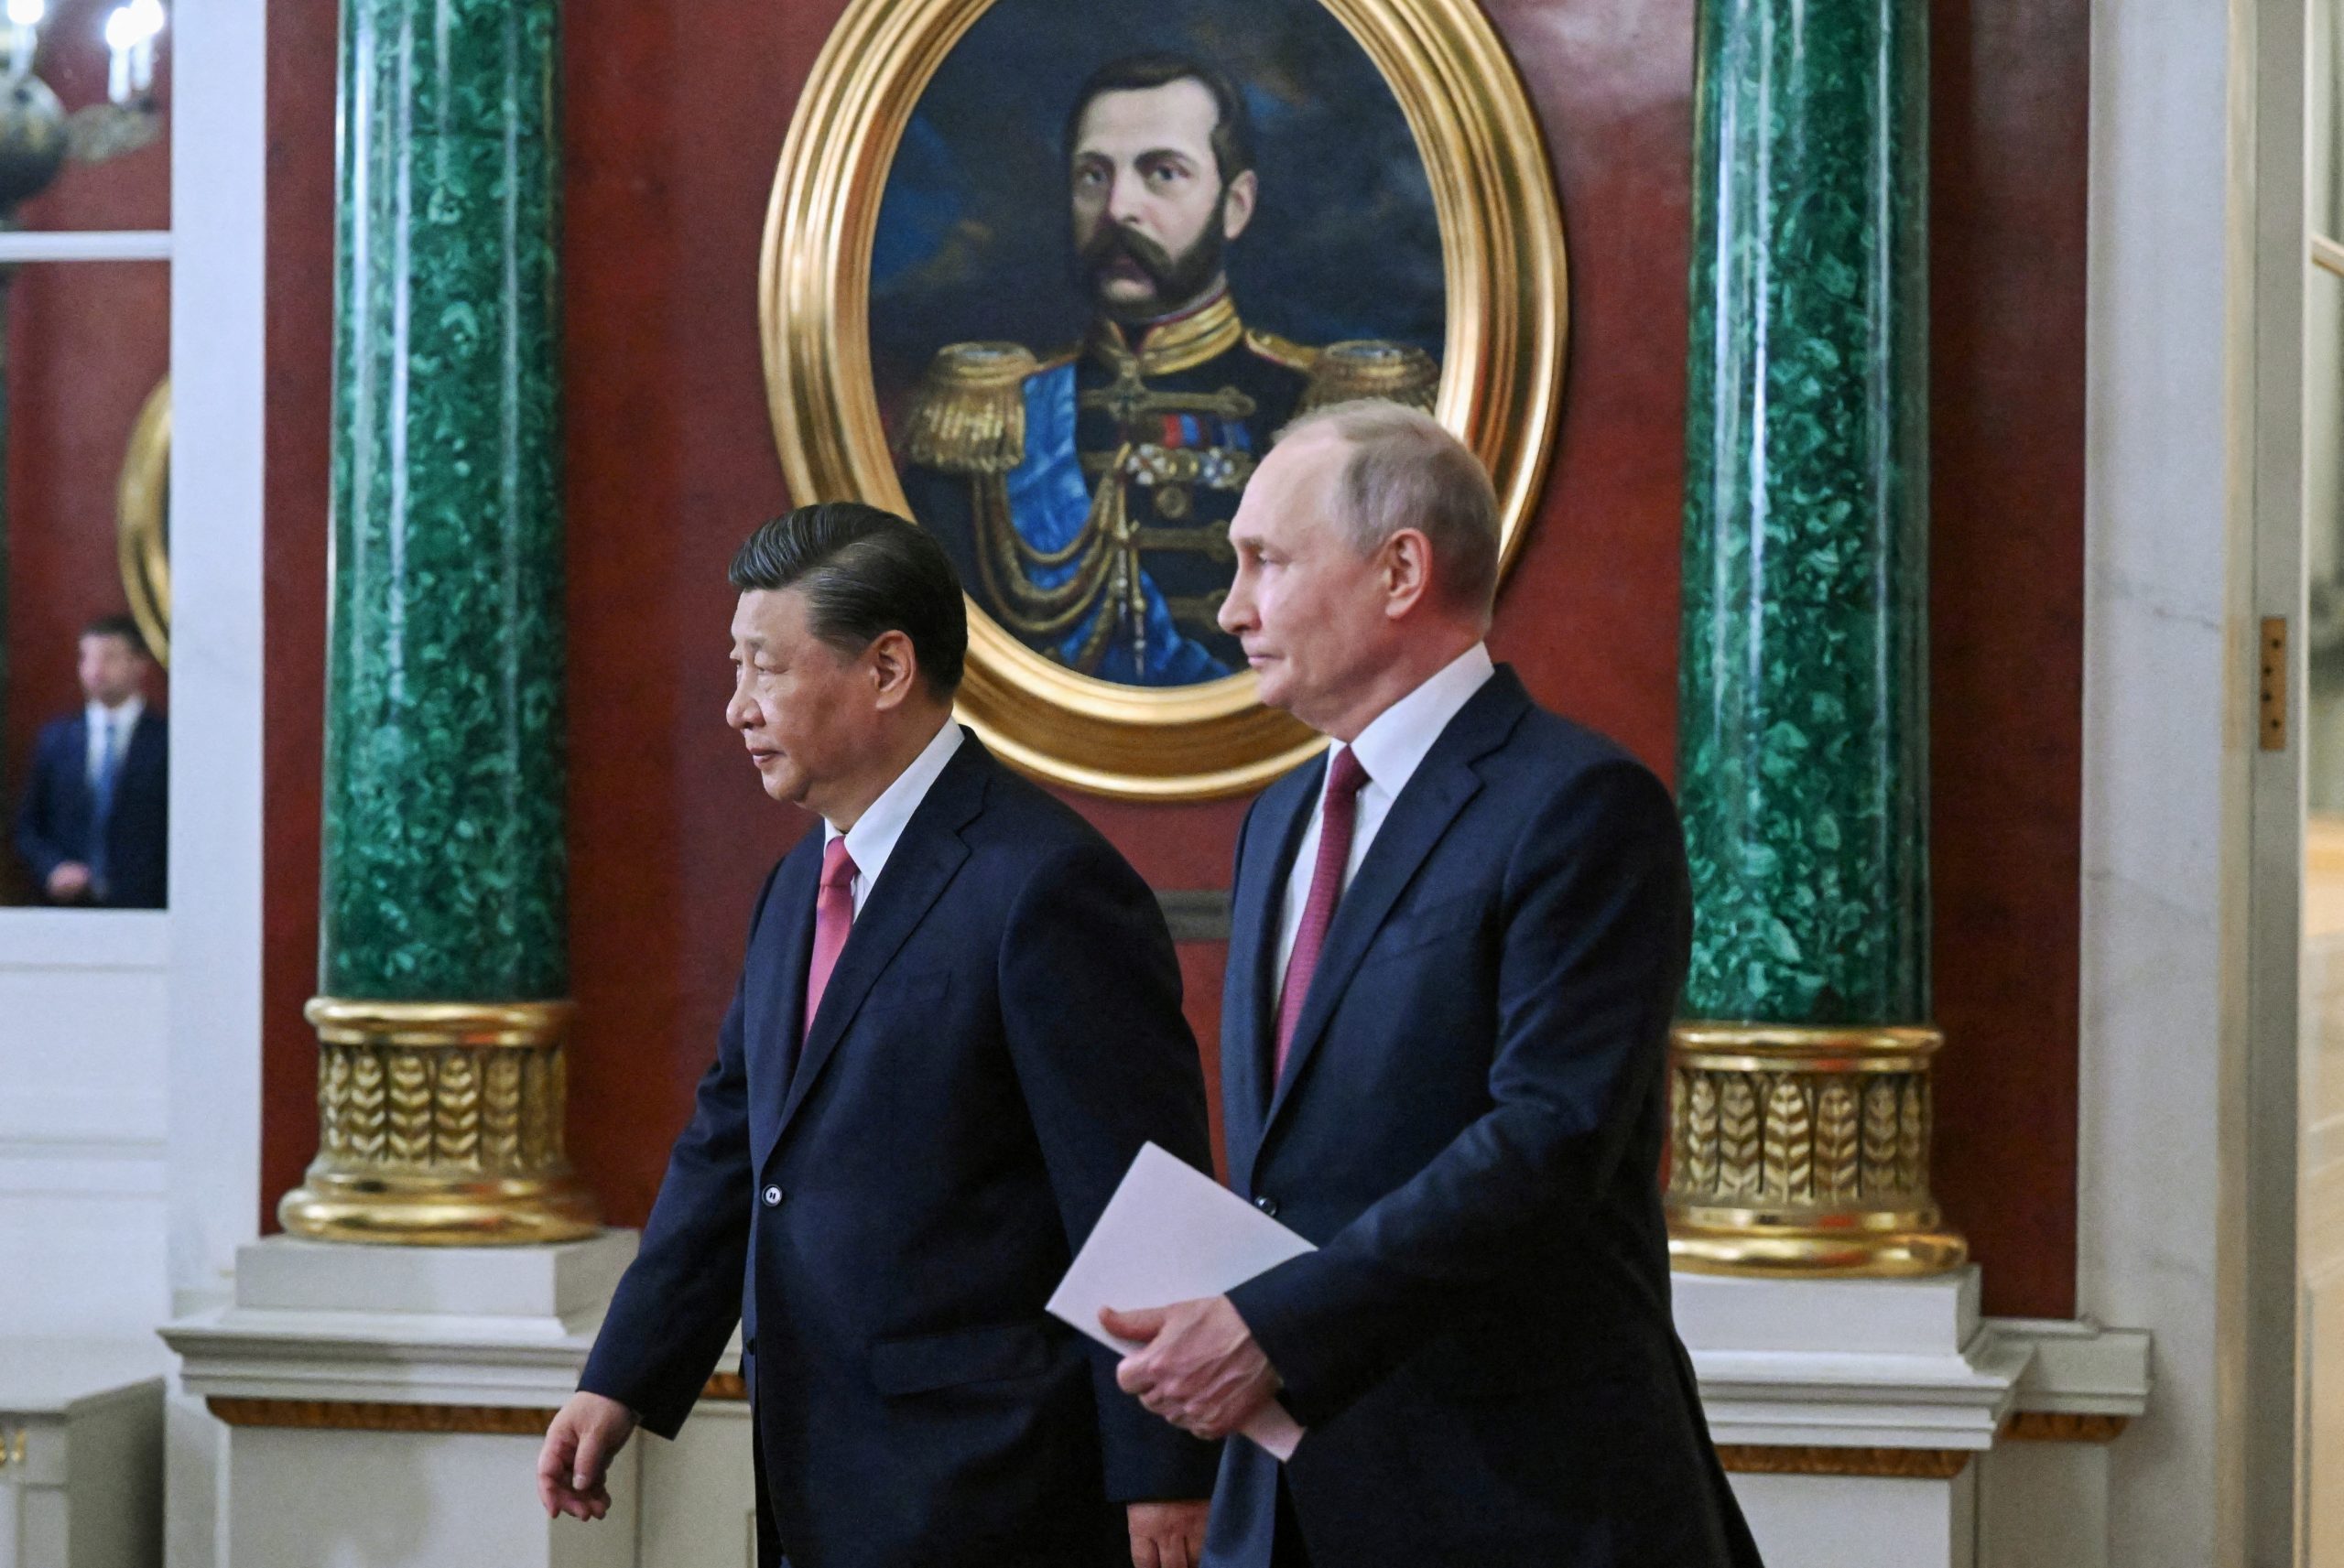 Photo: Russian President Vladimir Putin and Chinese President Xi Jinping arrive for a signing ceremony at the Kremlin in Moscow, Russia March 21, 2023. Credit: Sputnik/Grigory Sysoyev/Kremlin via REUTERS